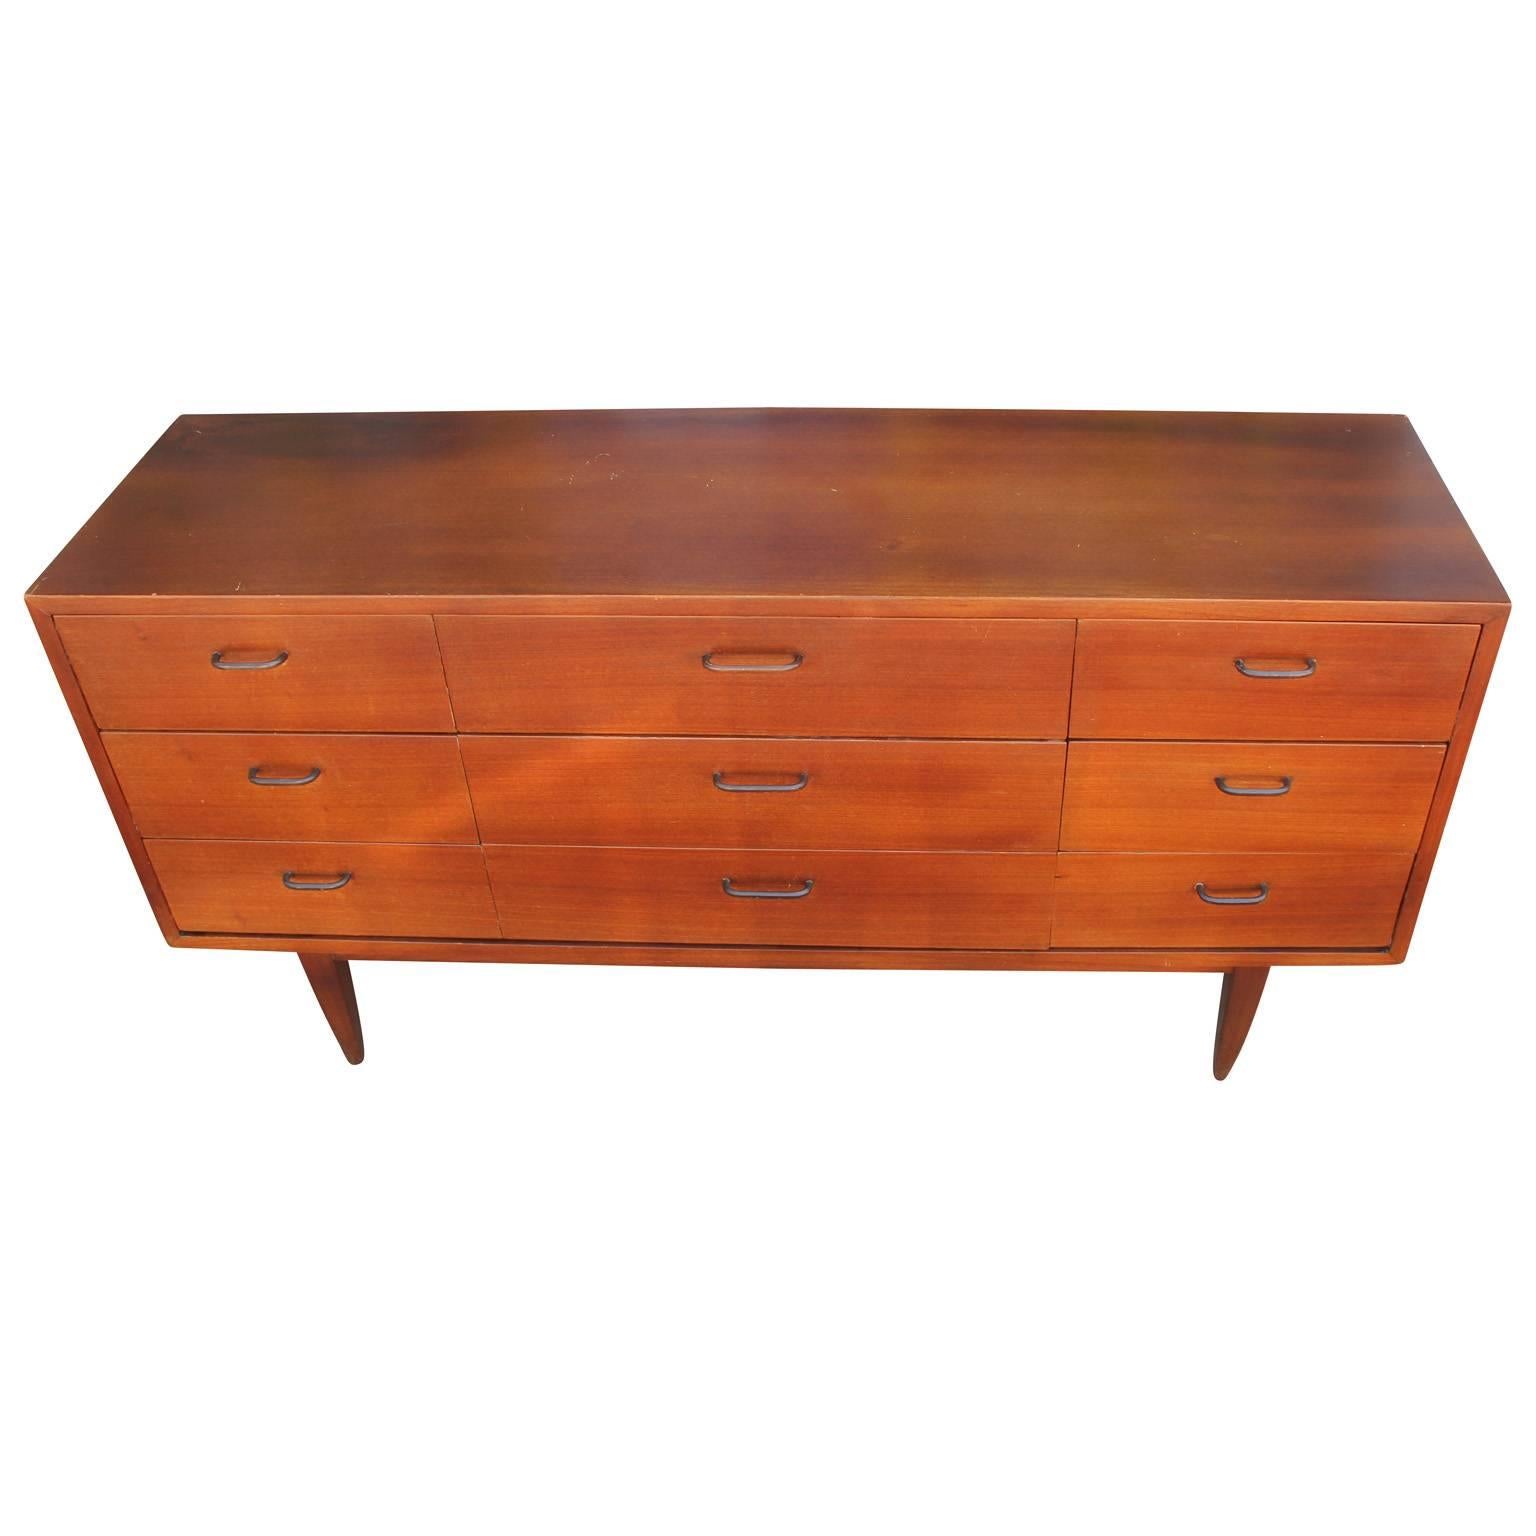 Wonderful nine-drawer teak dresser. Clean lined dresser is accented with heavily patinated brass pulls. Delicate tapered legs give the piece a light feel.